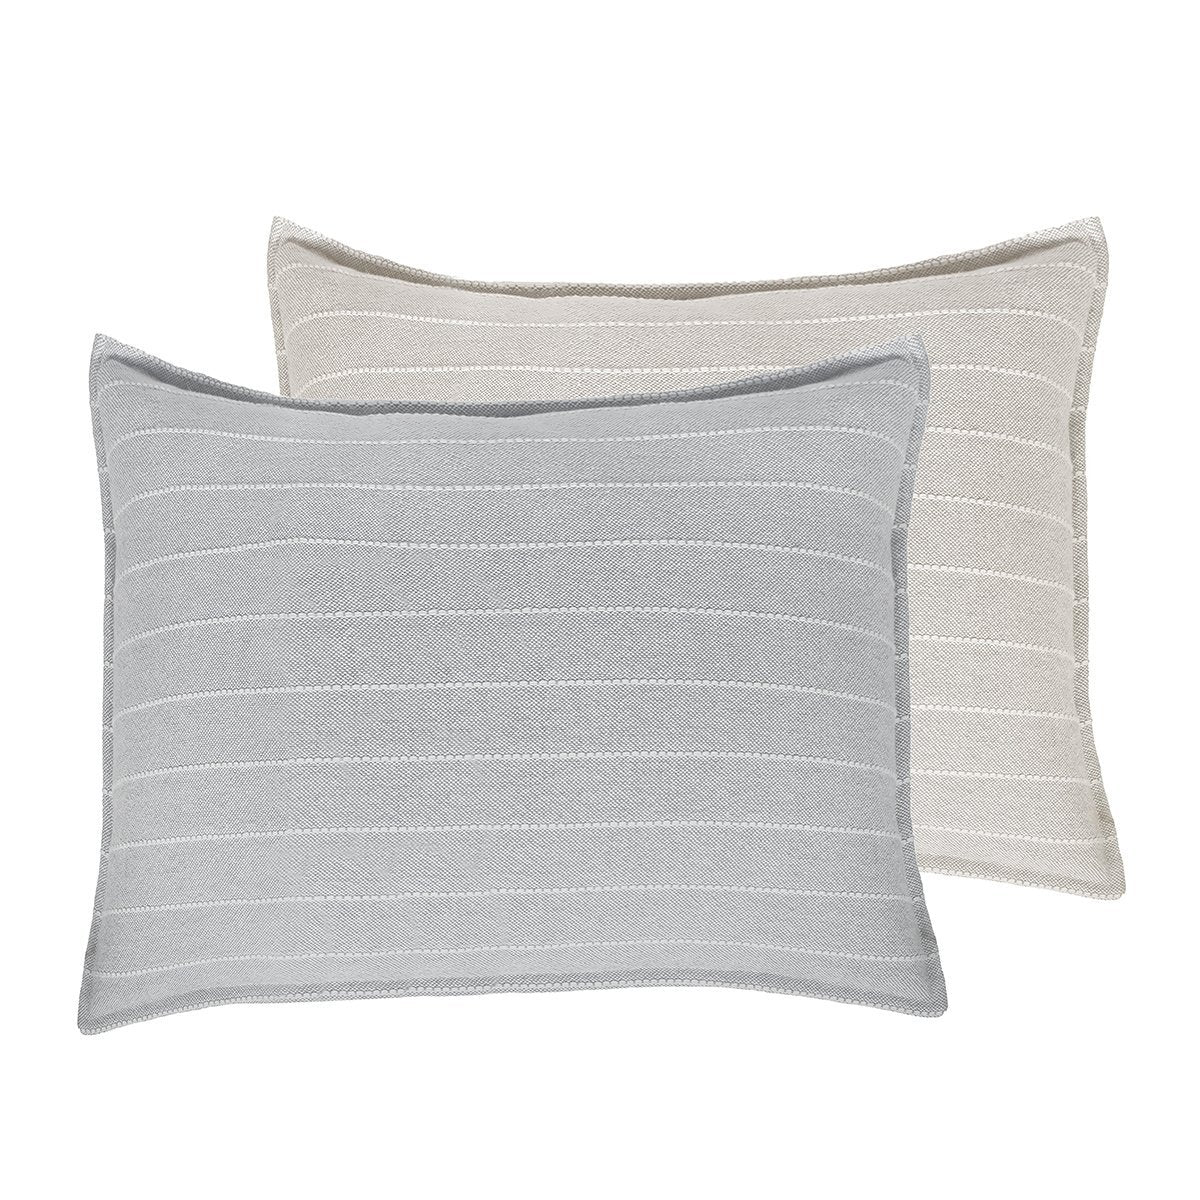 Henley Big Pillow by Pom Pom at Home